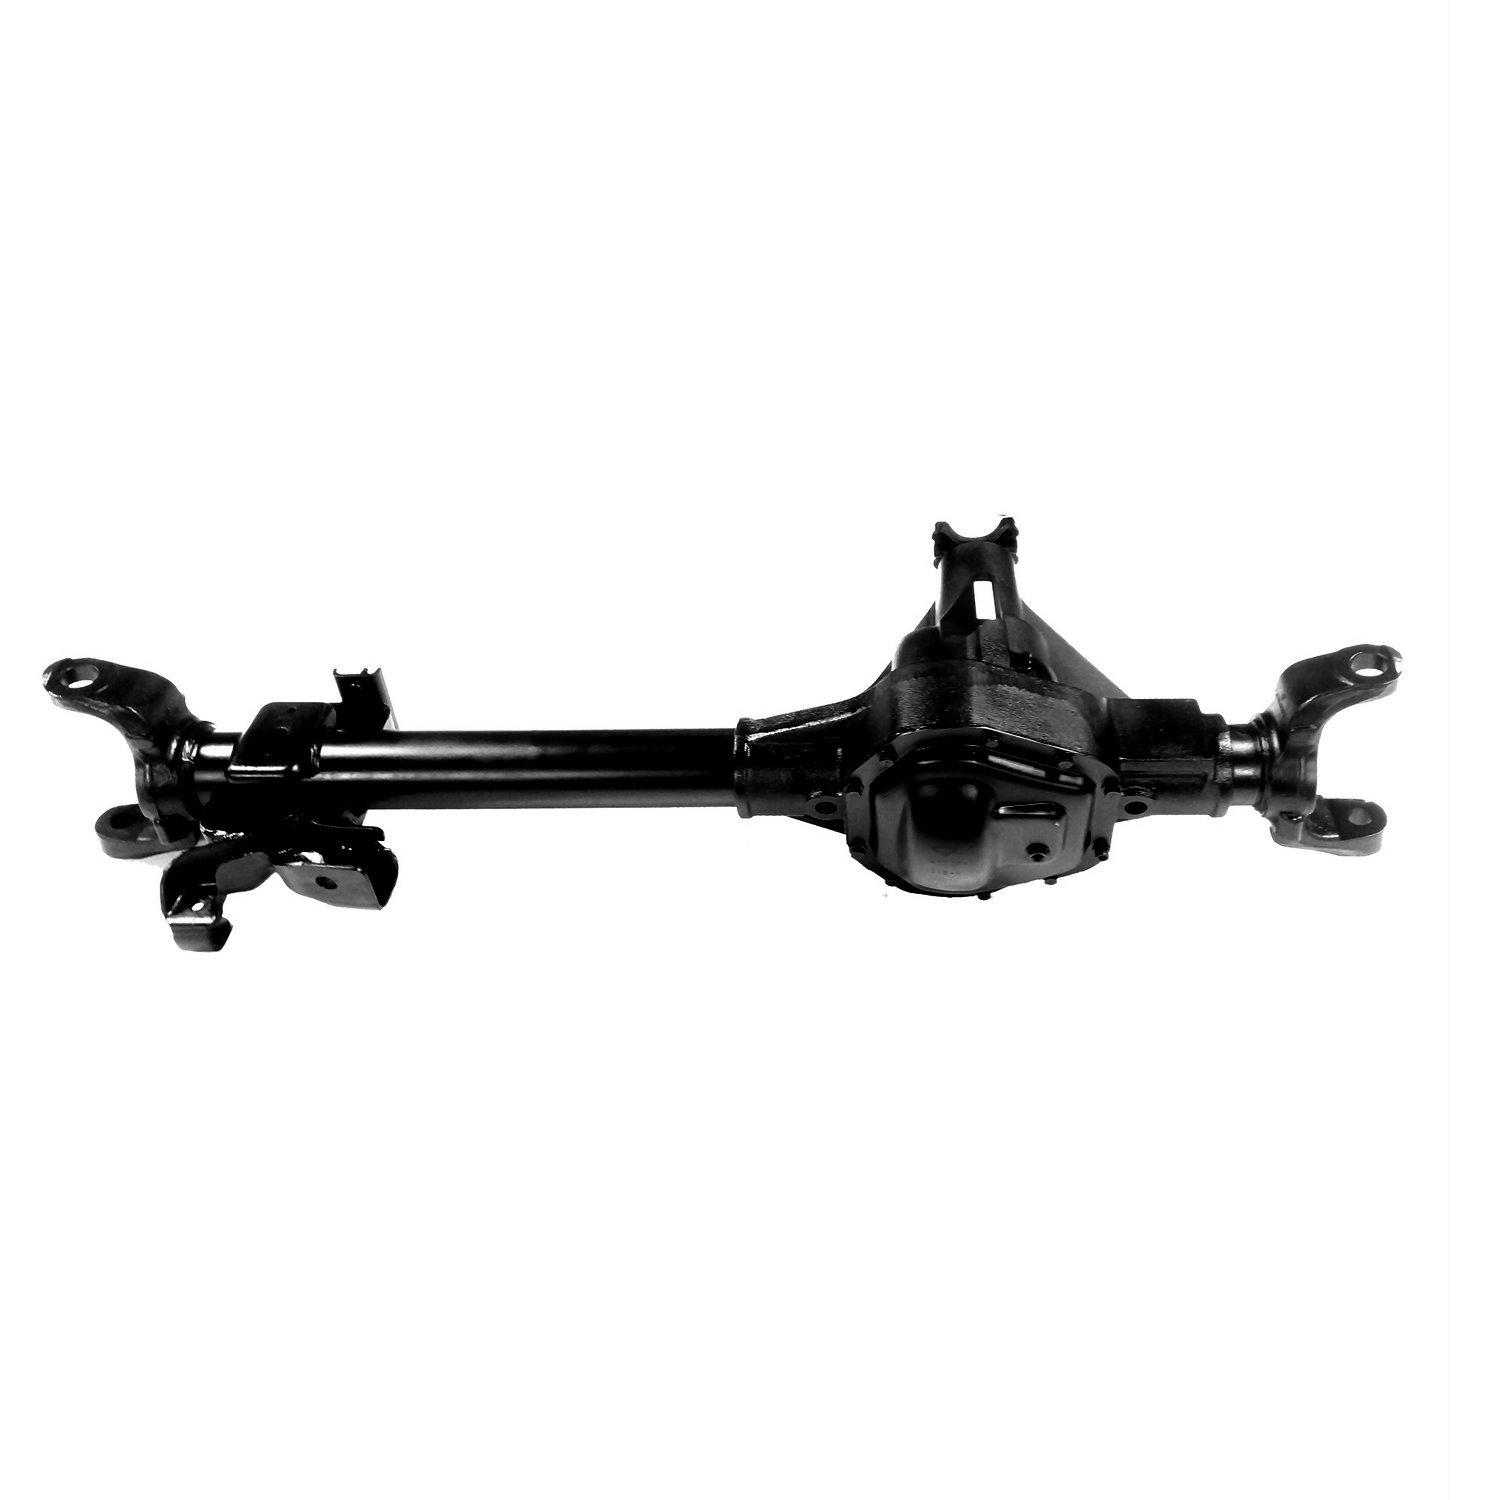 Reman Axle Assembly, For Dana 60, 2005-07 Ford